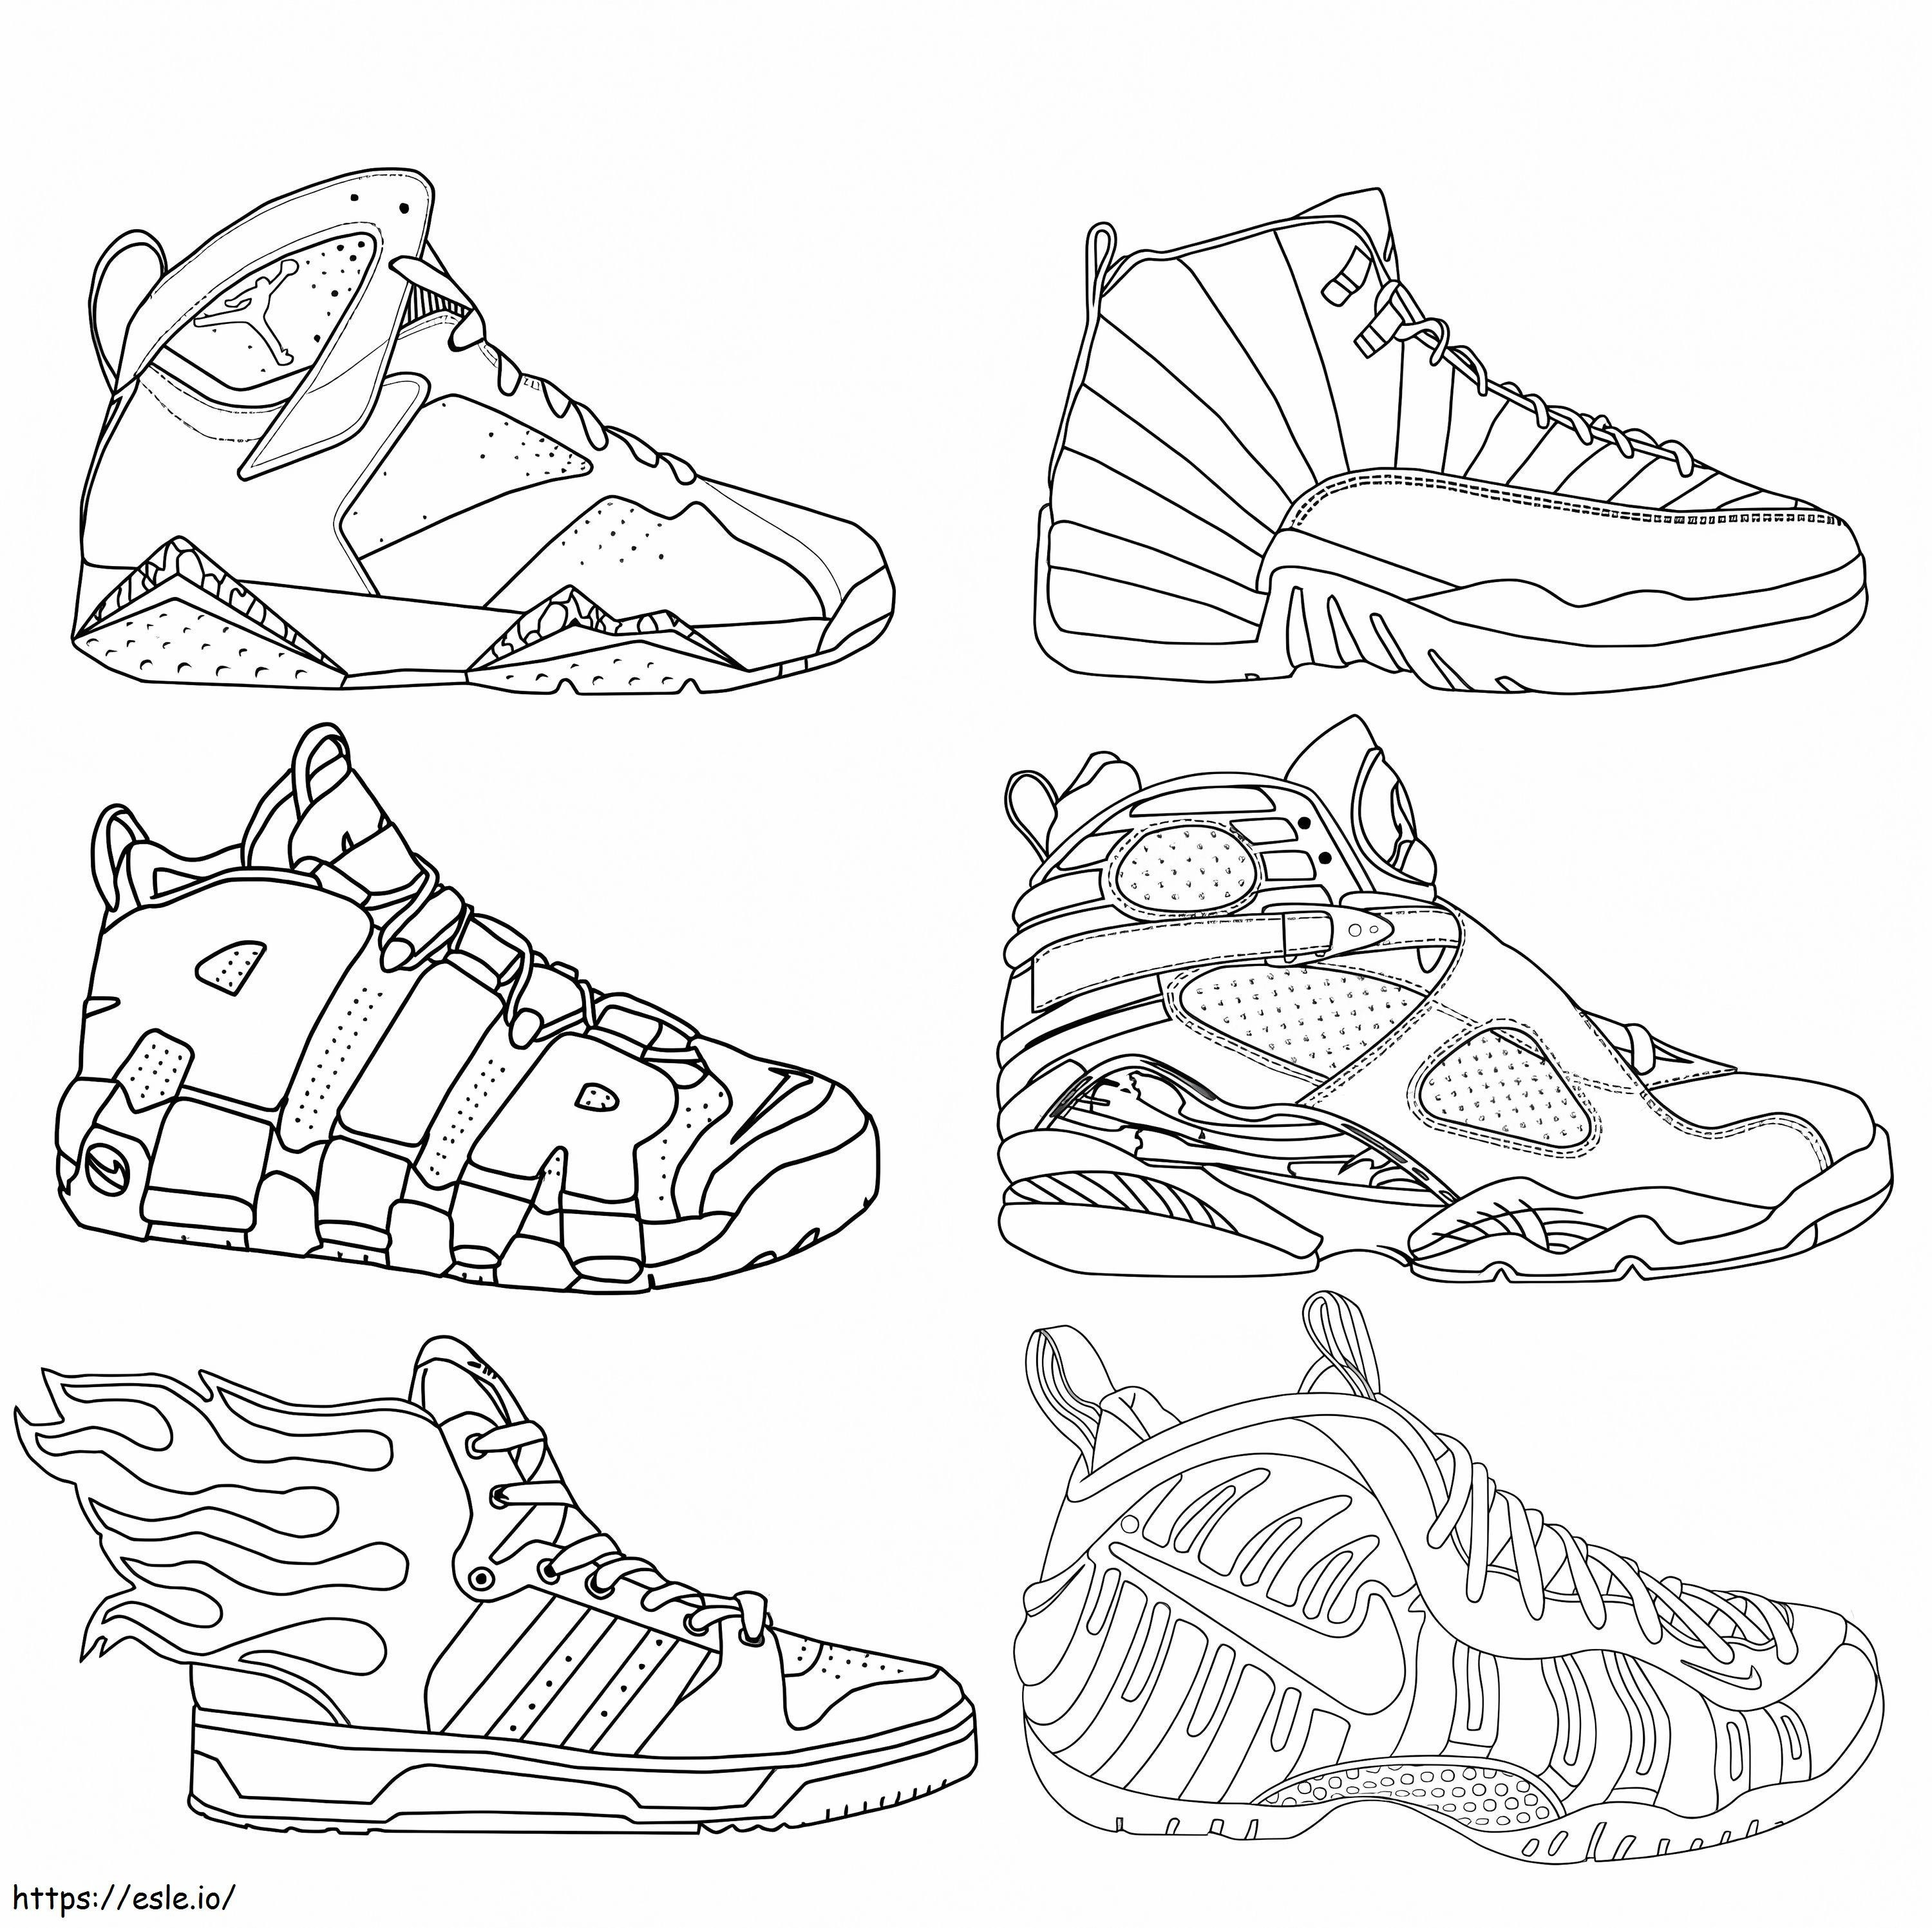 Six Slippers coloring page